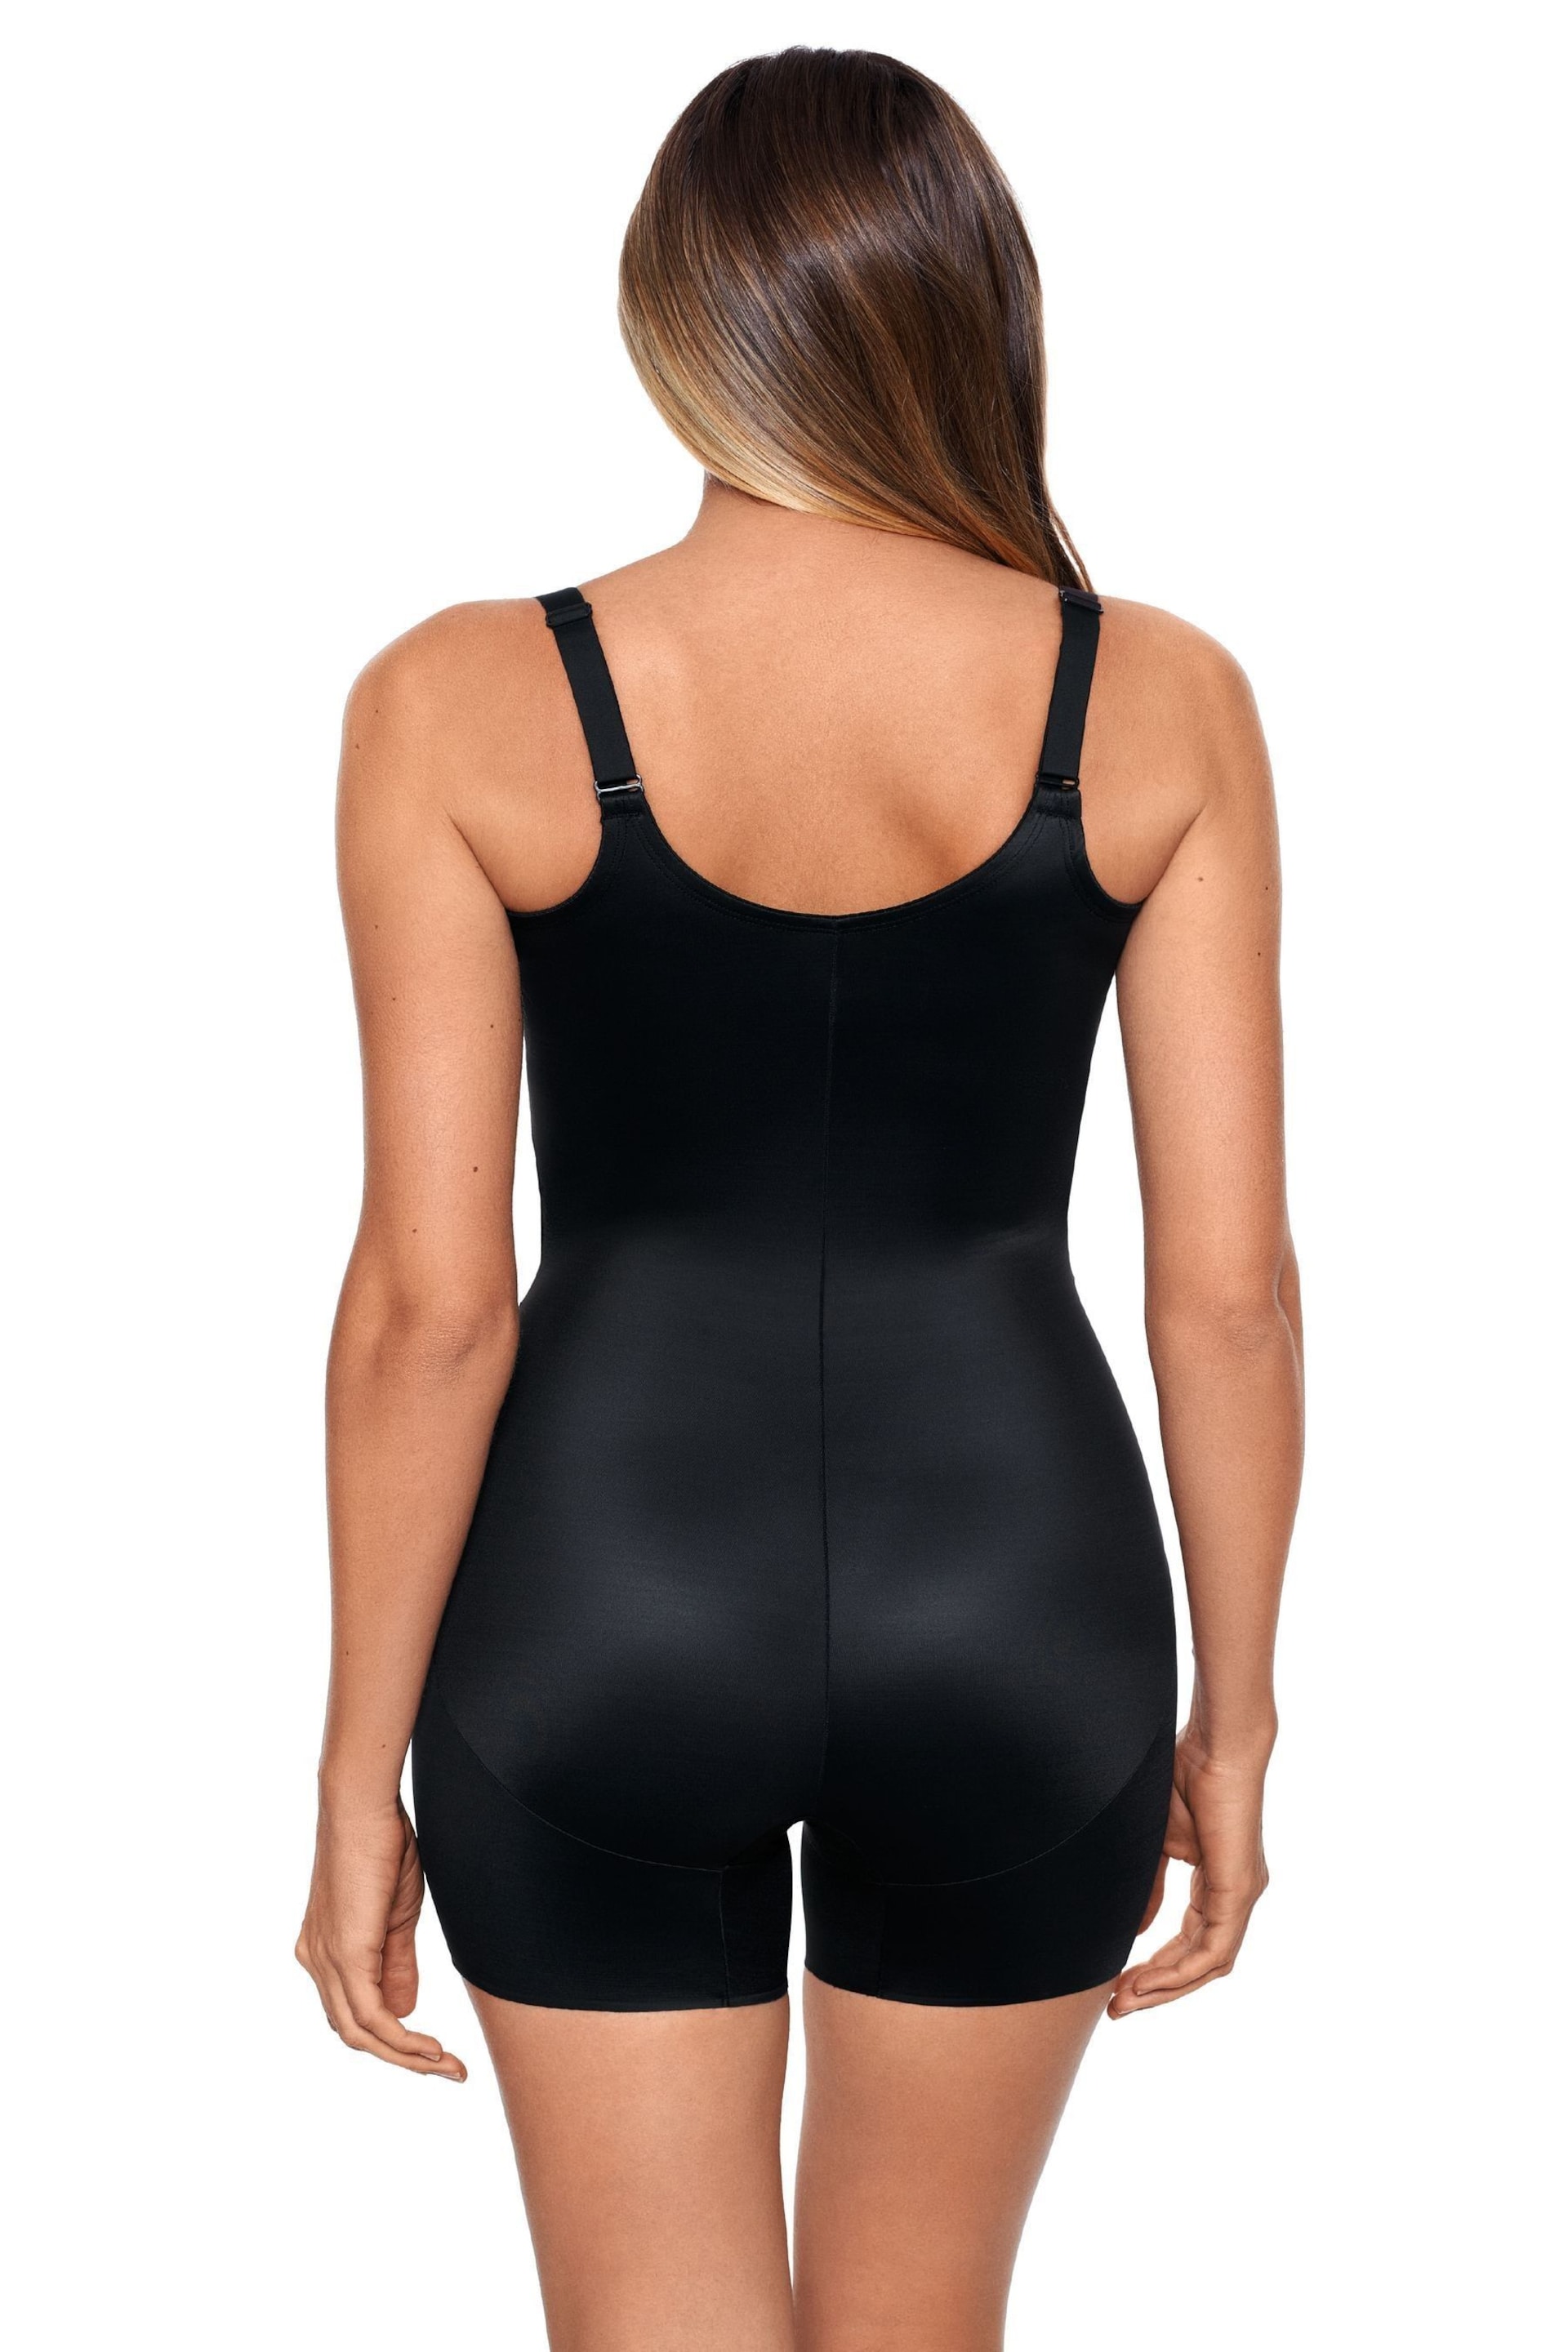 Miraclesuit Shapewear Instant Tummy Tuck Extra Firm Control Shaping Body - Image 2 of 3